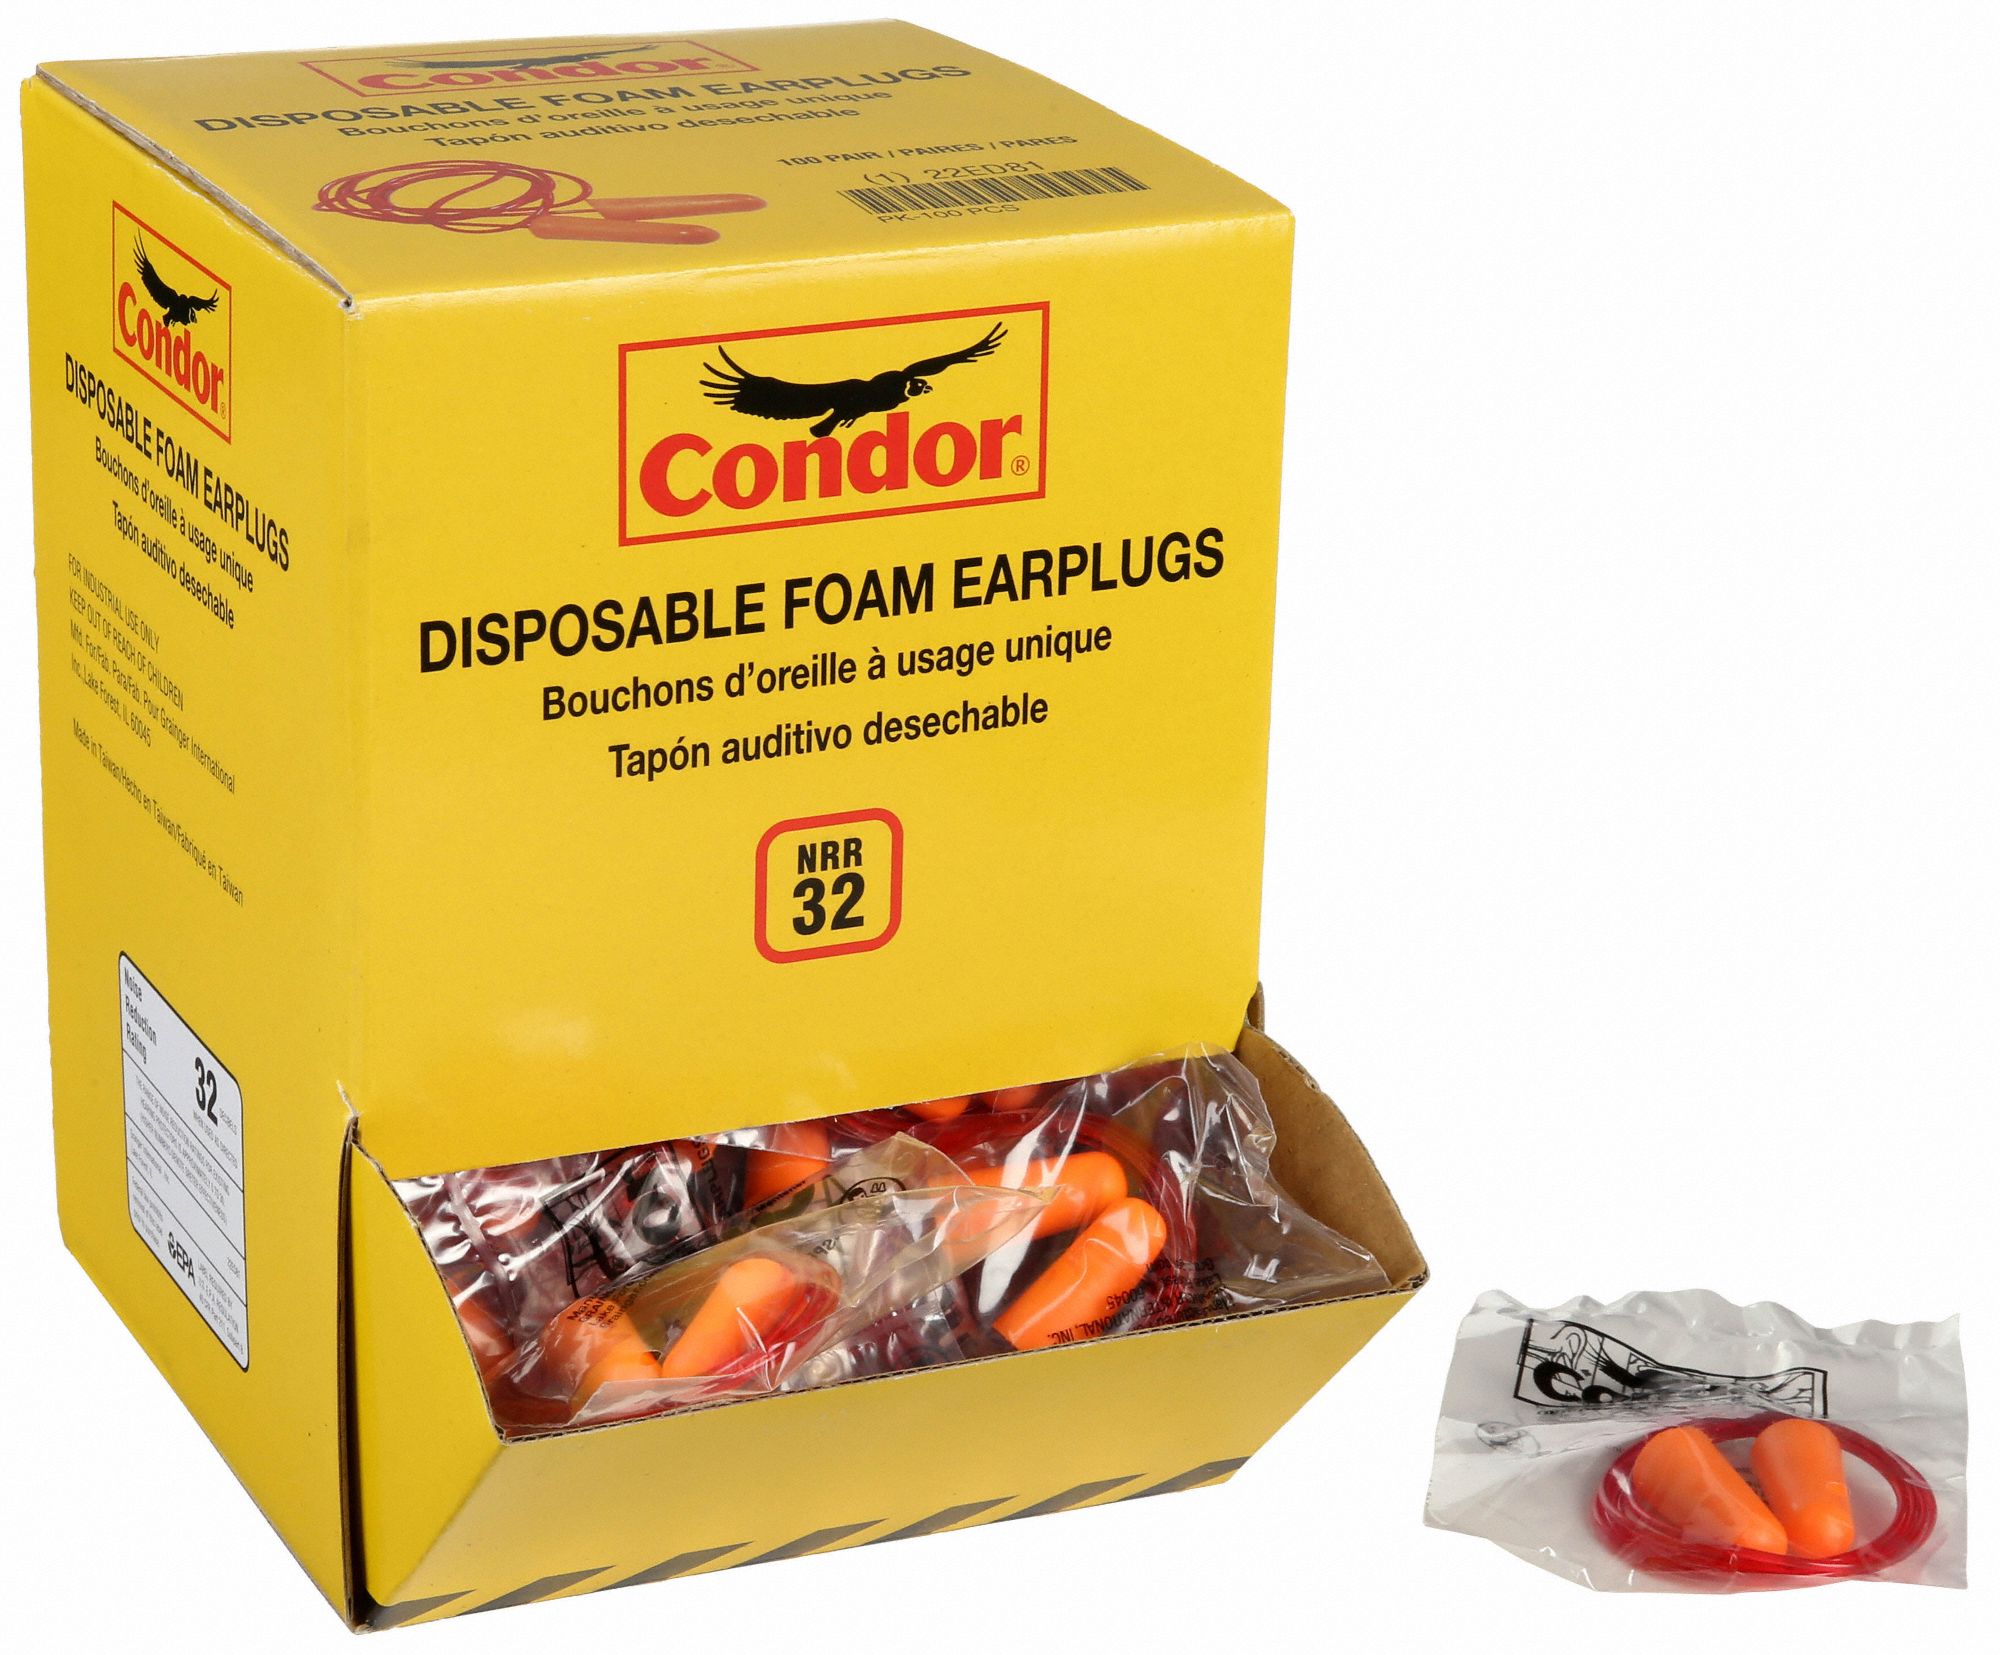 Red Disposable Earplugs (100-Pack) with 32 dB Noise Reduction Rating